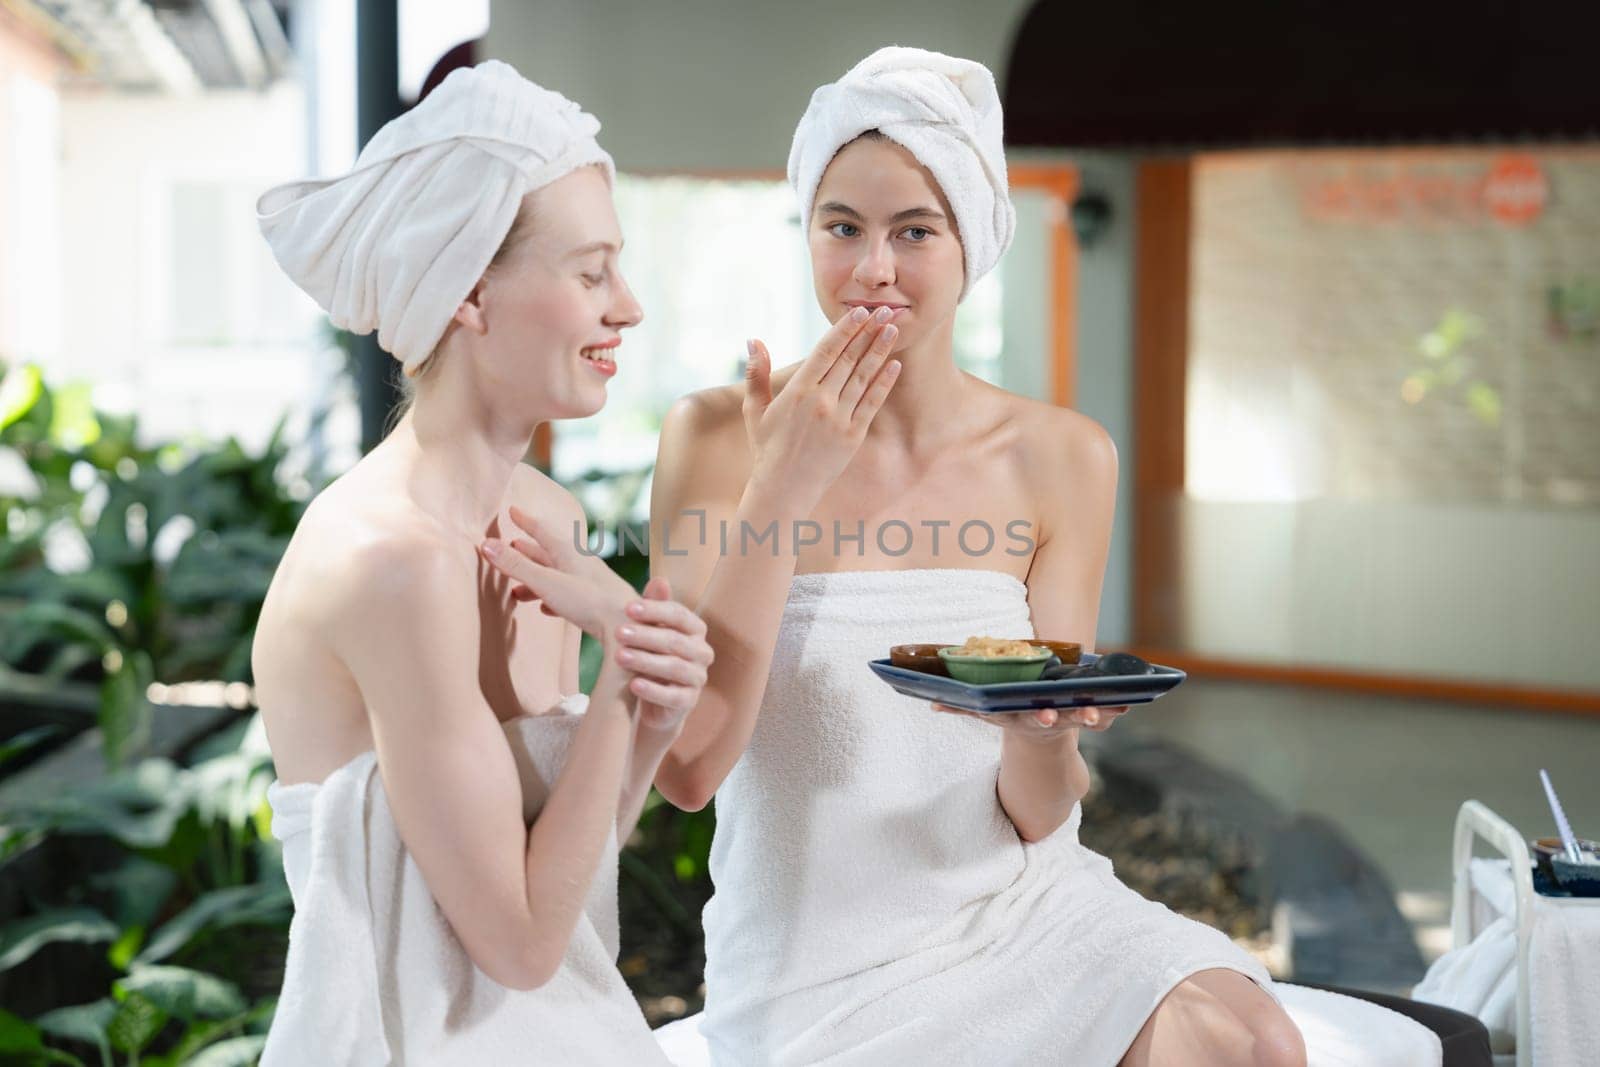 Two attractive woman in towel giggling during hold the herbal bowl. Tranquility. by biancoblue